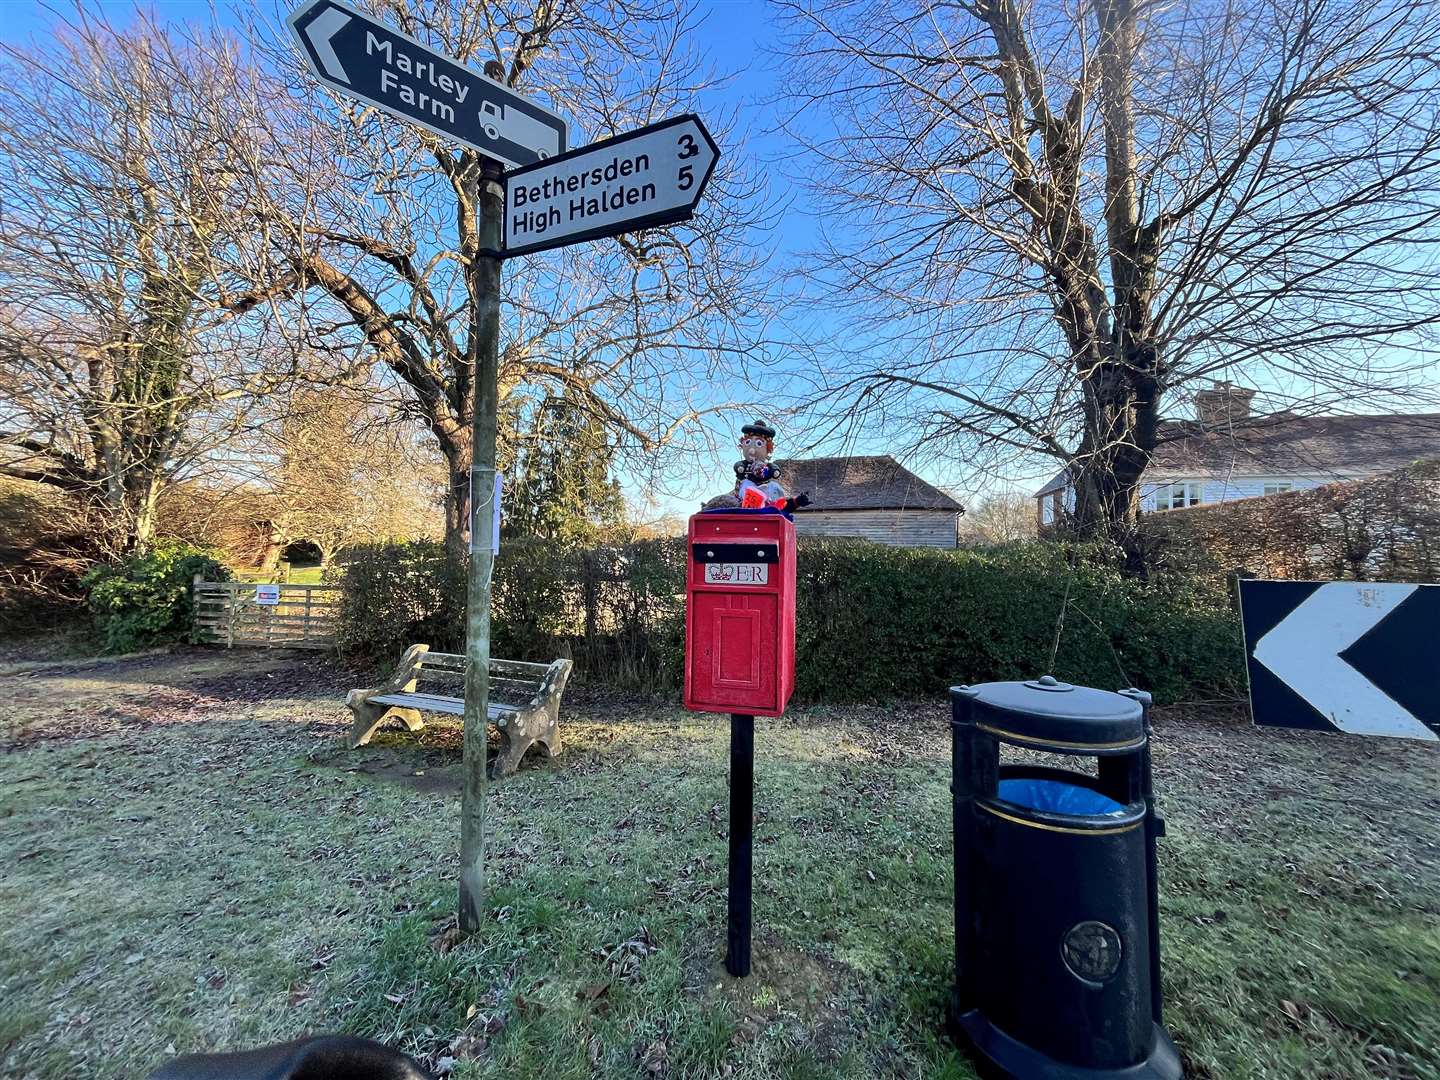 The postbox is situated at the end of Biddenden Road at the junction of Cage Lane and Bethersden Road